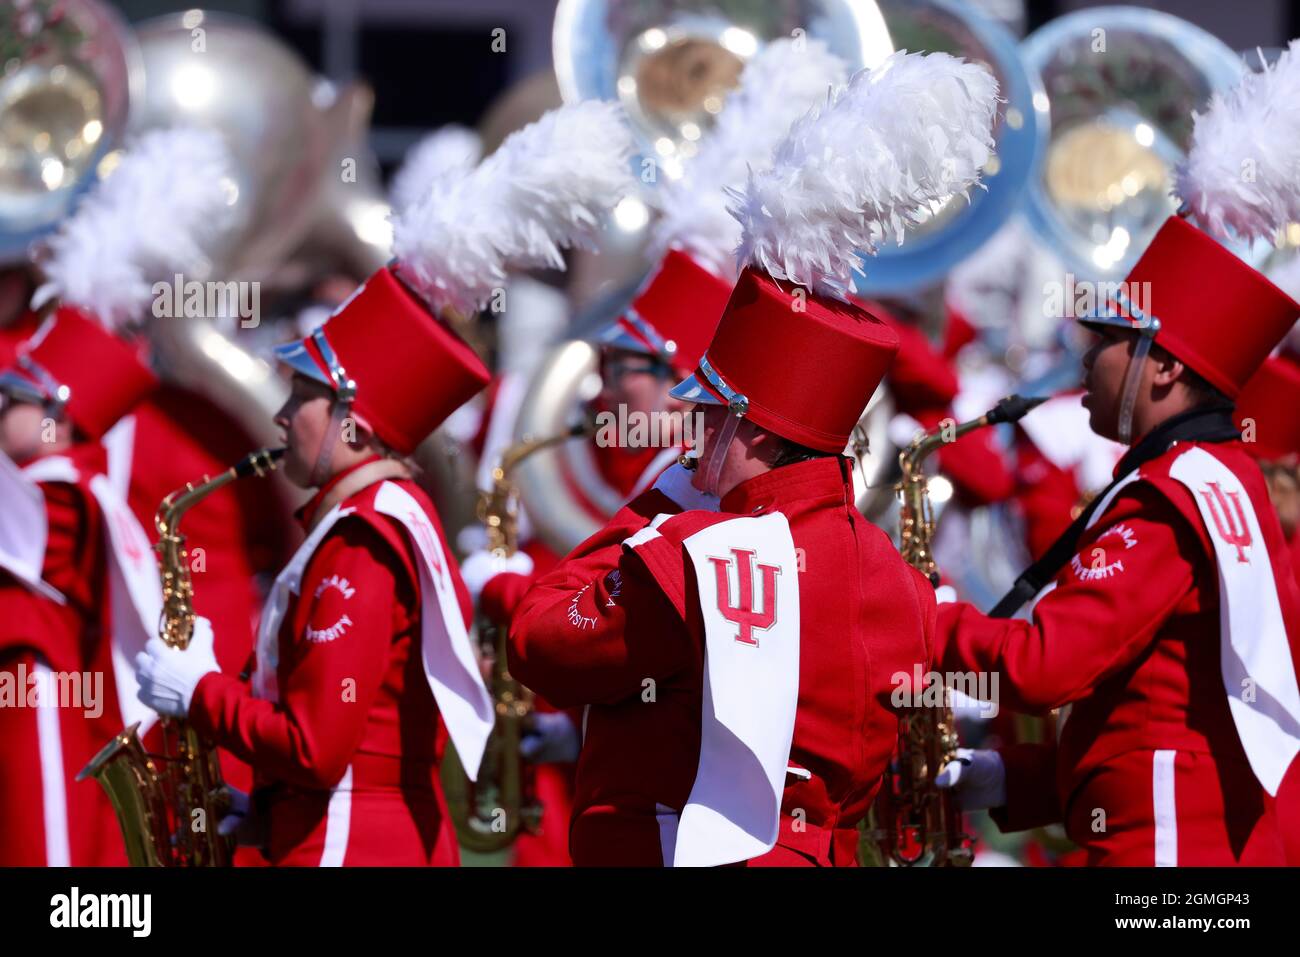 BLOOMINGTON, UNITED STATES – 2021/09/18: Members of the Indiana University Marching 100 march before the Hoosiers play against University of Cincinnati during an NCAA football game on September 18, 2021 at Memorial Stadium in Bloomington, Ind. IU lost to Cincinnati 38-24. Stock Photo